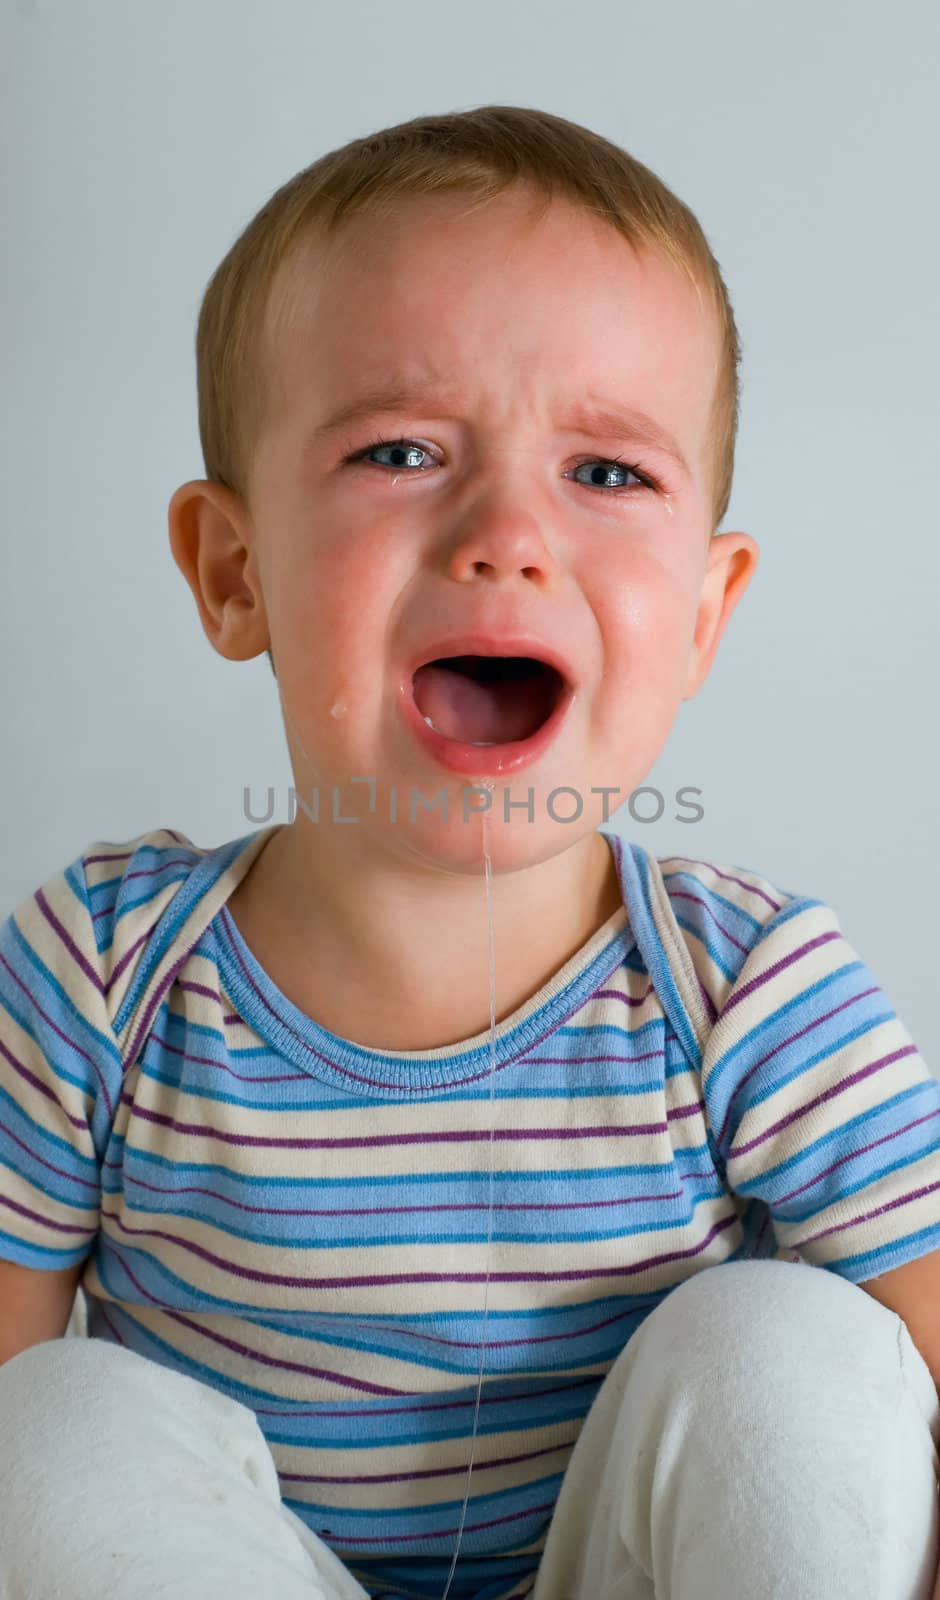 Cute crying boy on gray background